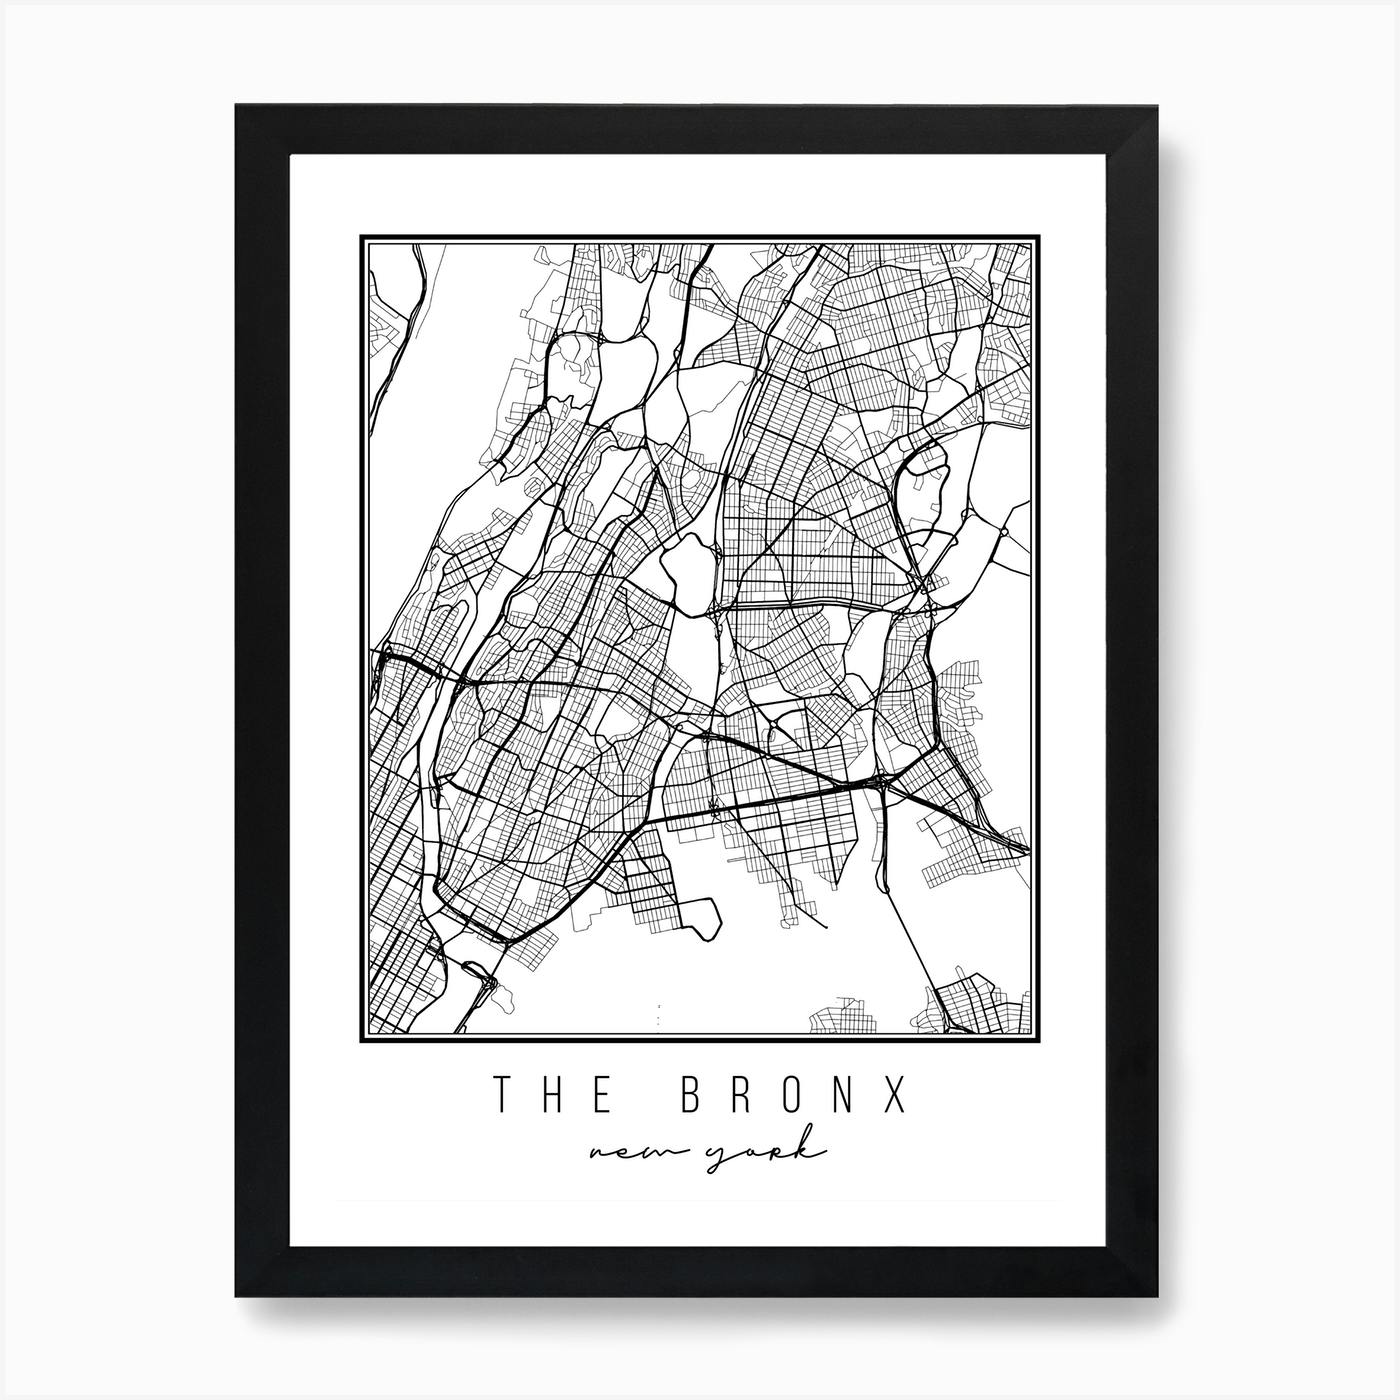 The Bronx Square Map Poster The Bronx Wall Art Custom Personalized map The Bronx New York Map Print The Bronx gift